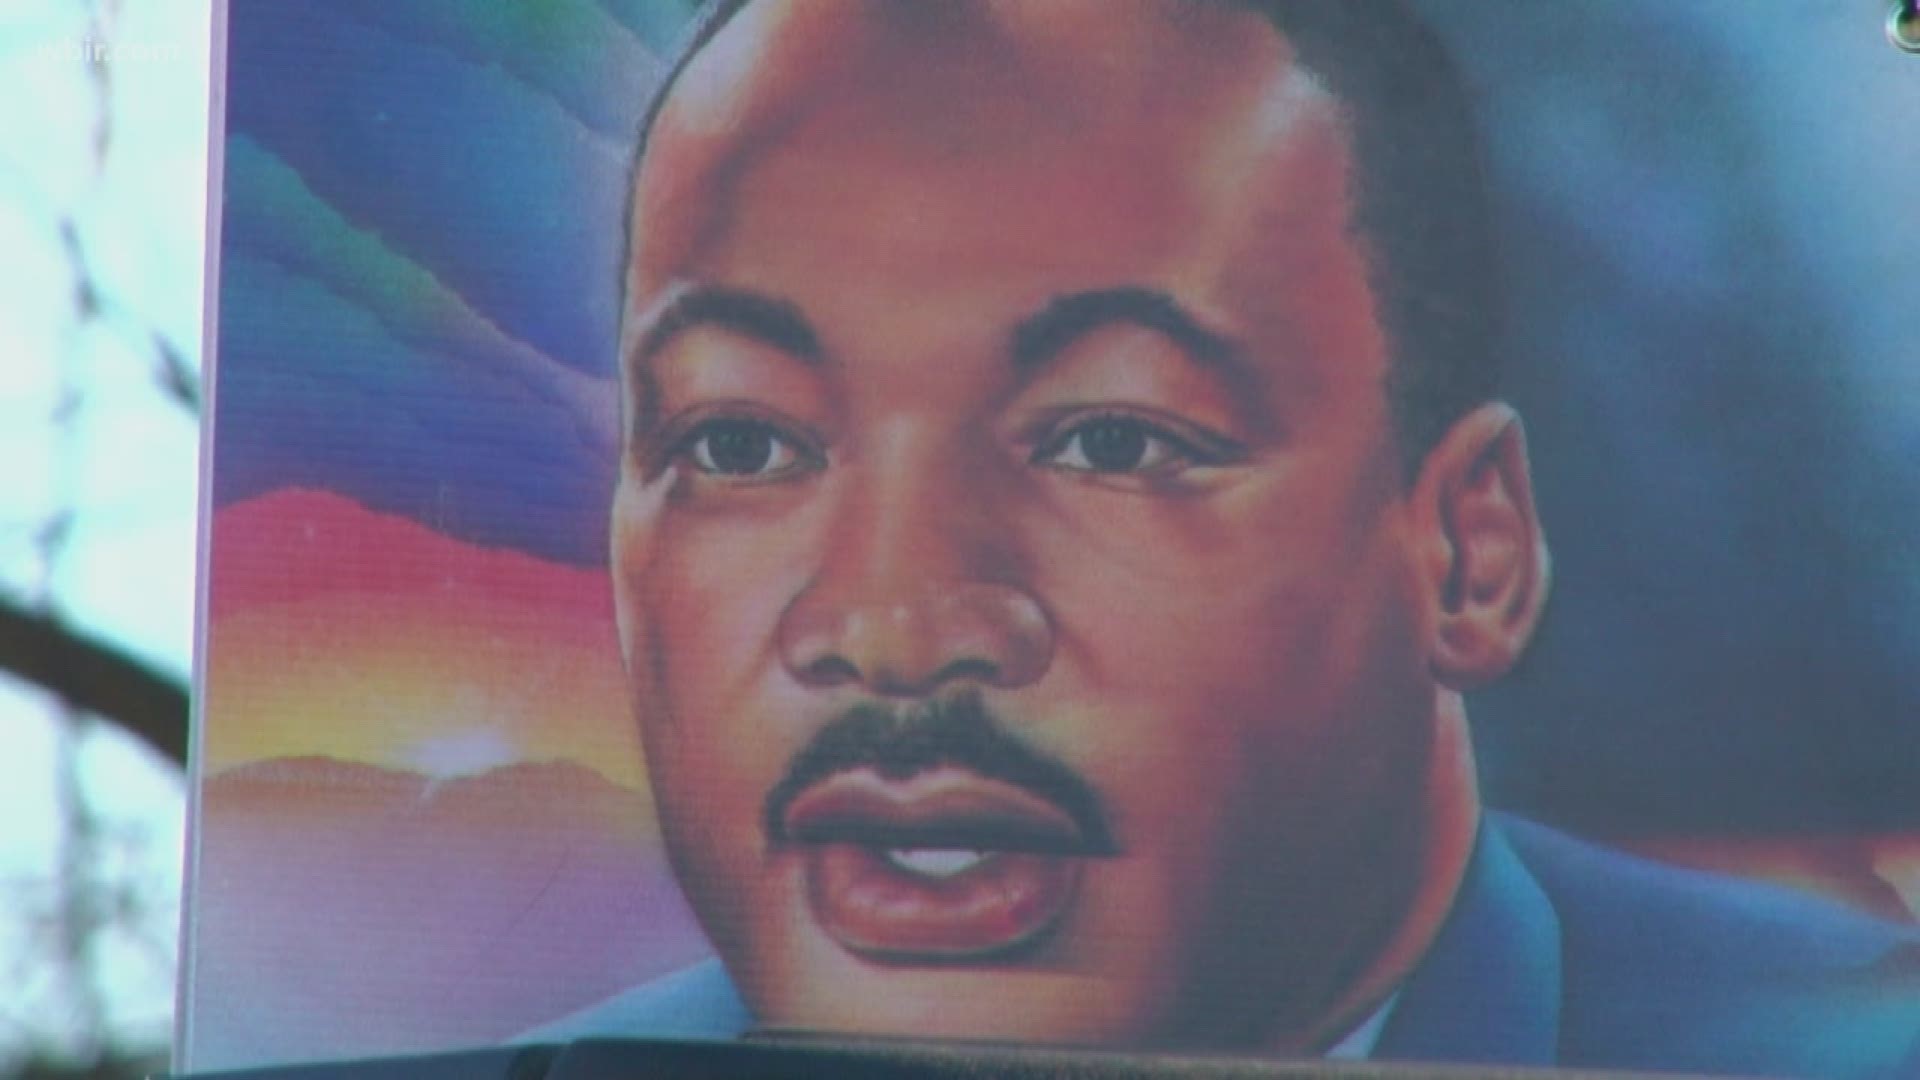 Dr. King's message gives us a warm reminder of unity and peace -- even on this cold day.